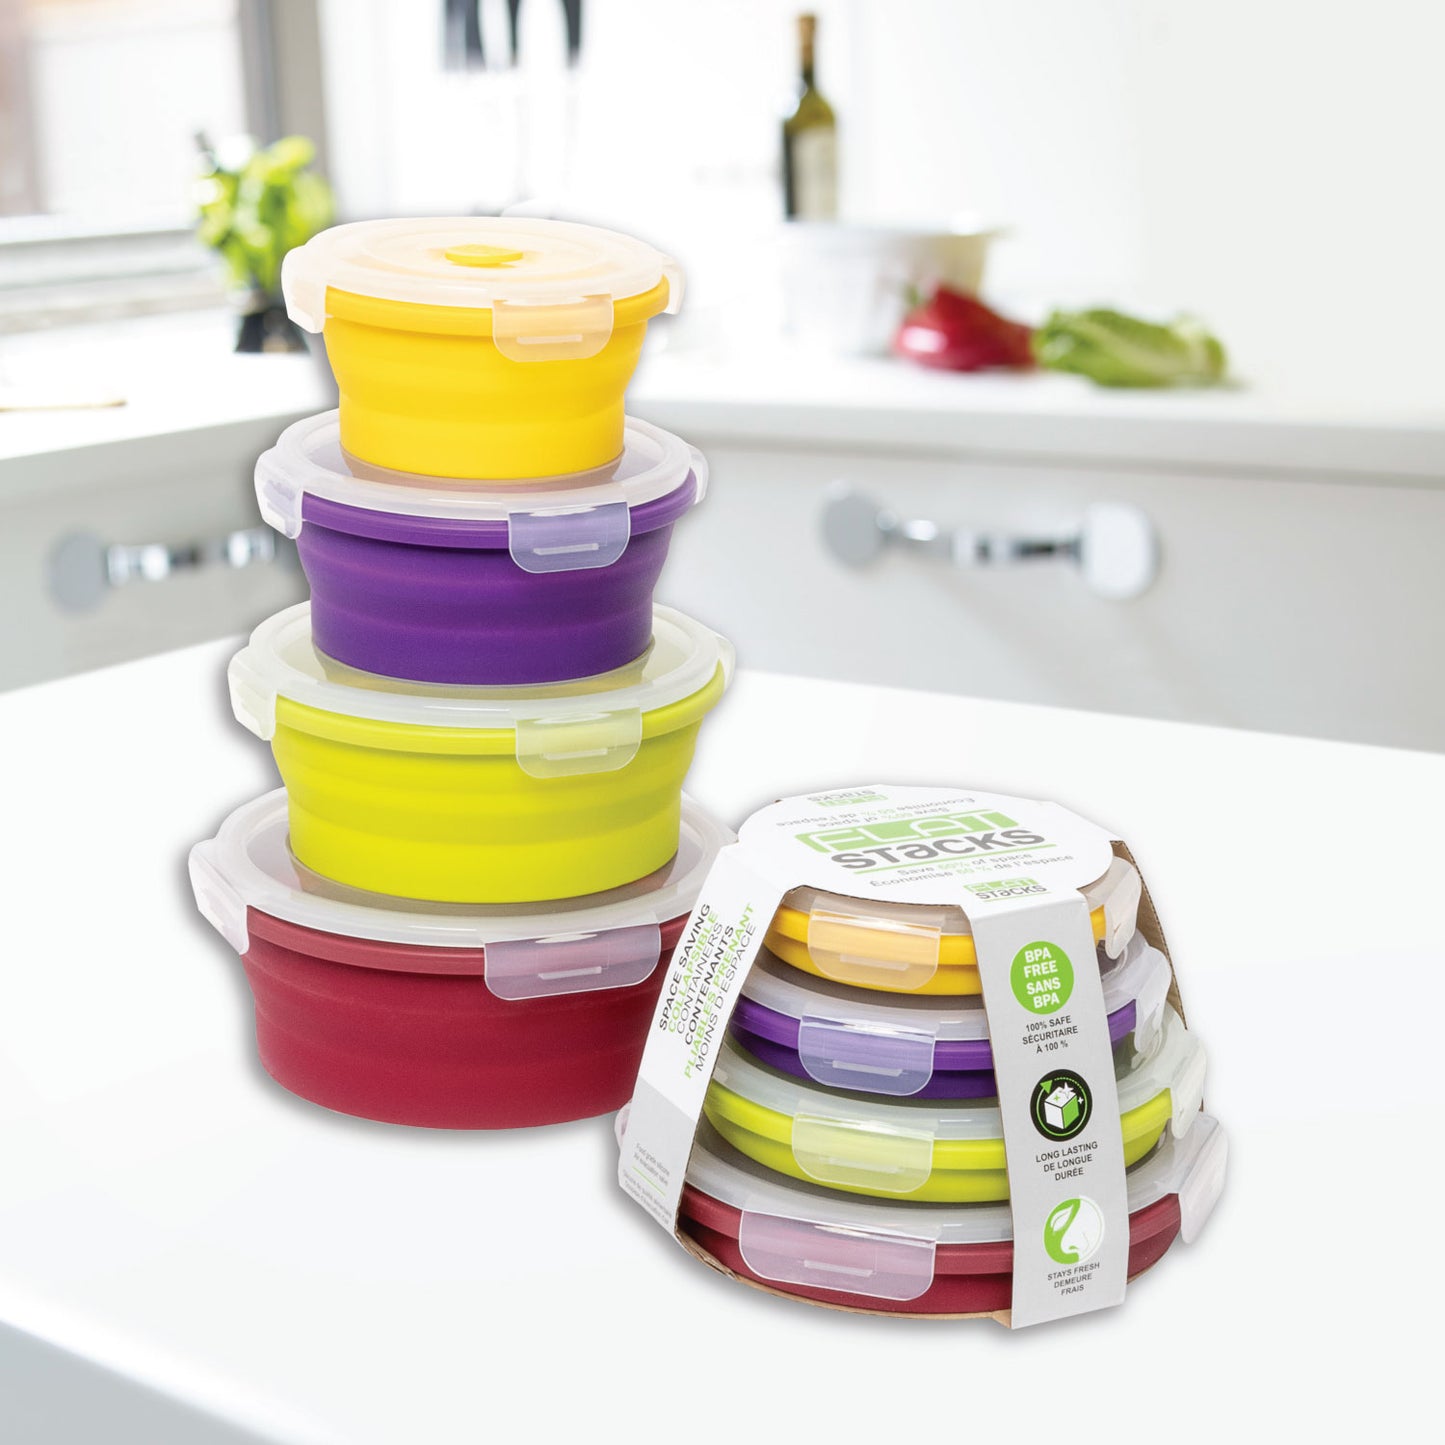 FLAT STACKS 4 PC. ROUND CONTAINER SET